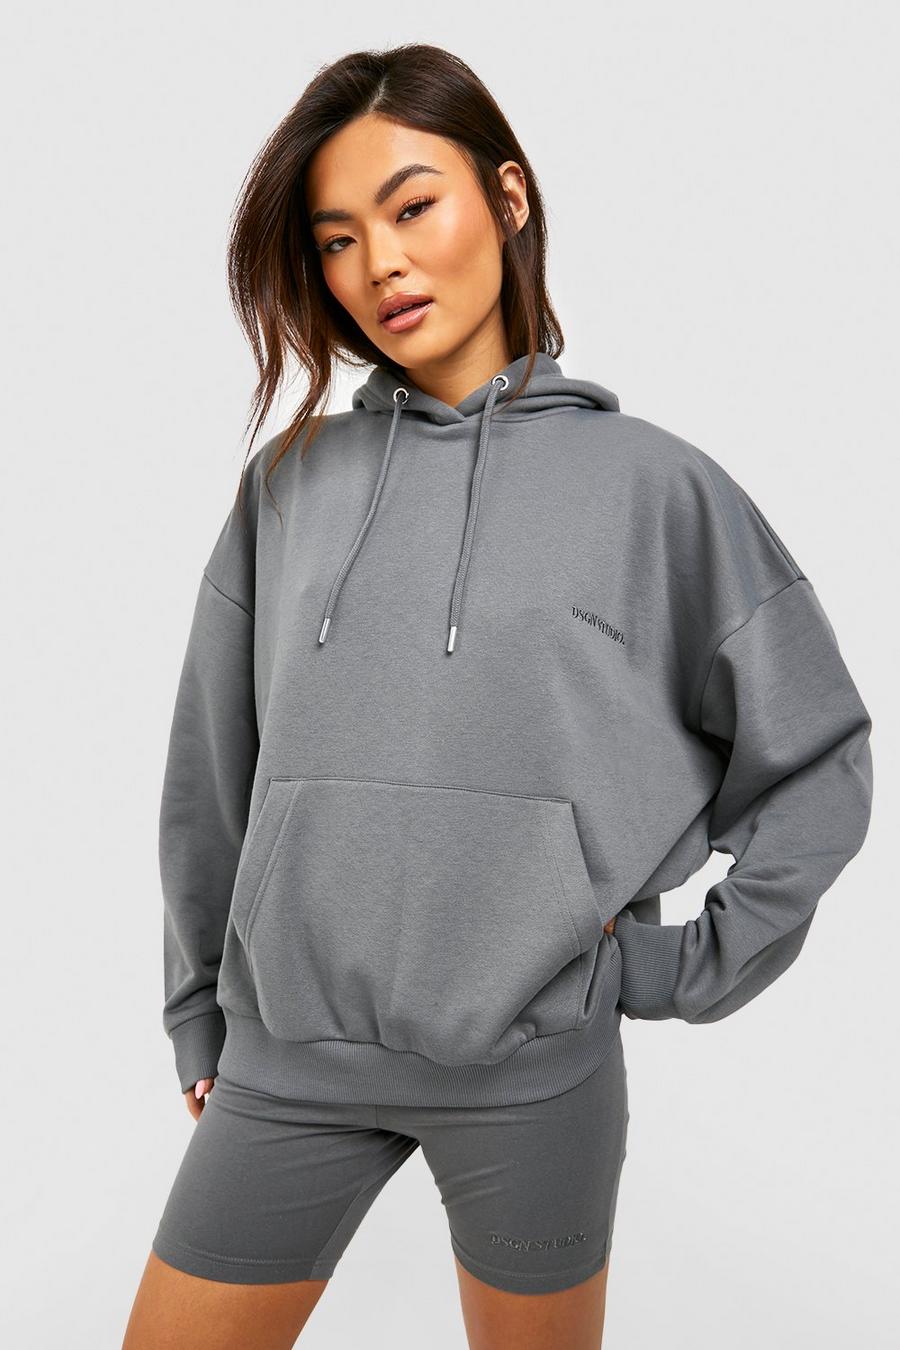 Charcoal gris Oversized Hoodie And Cycling Short Set